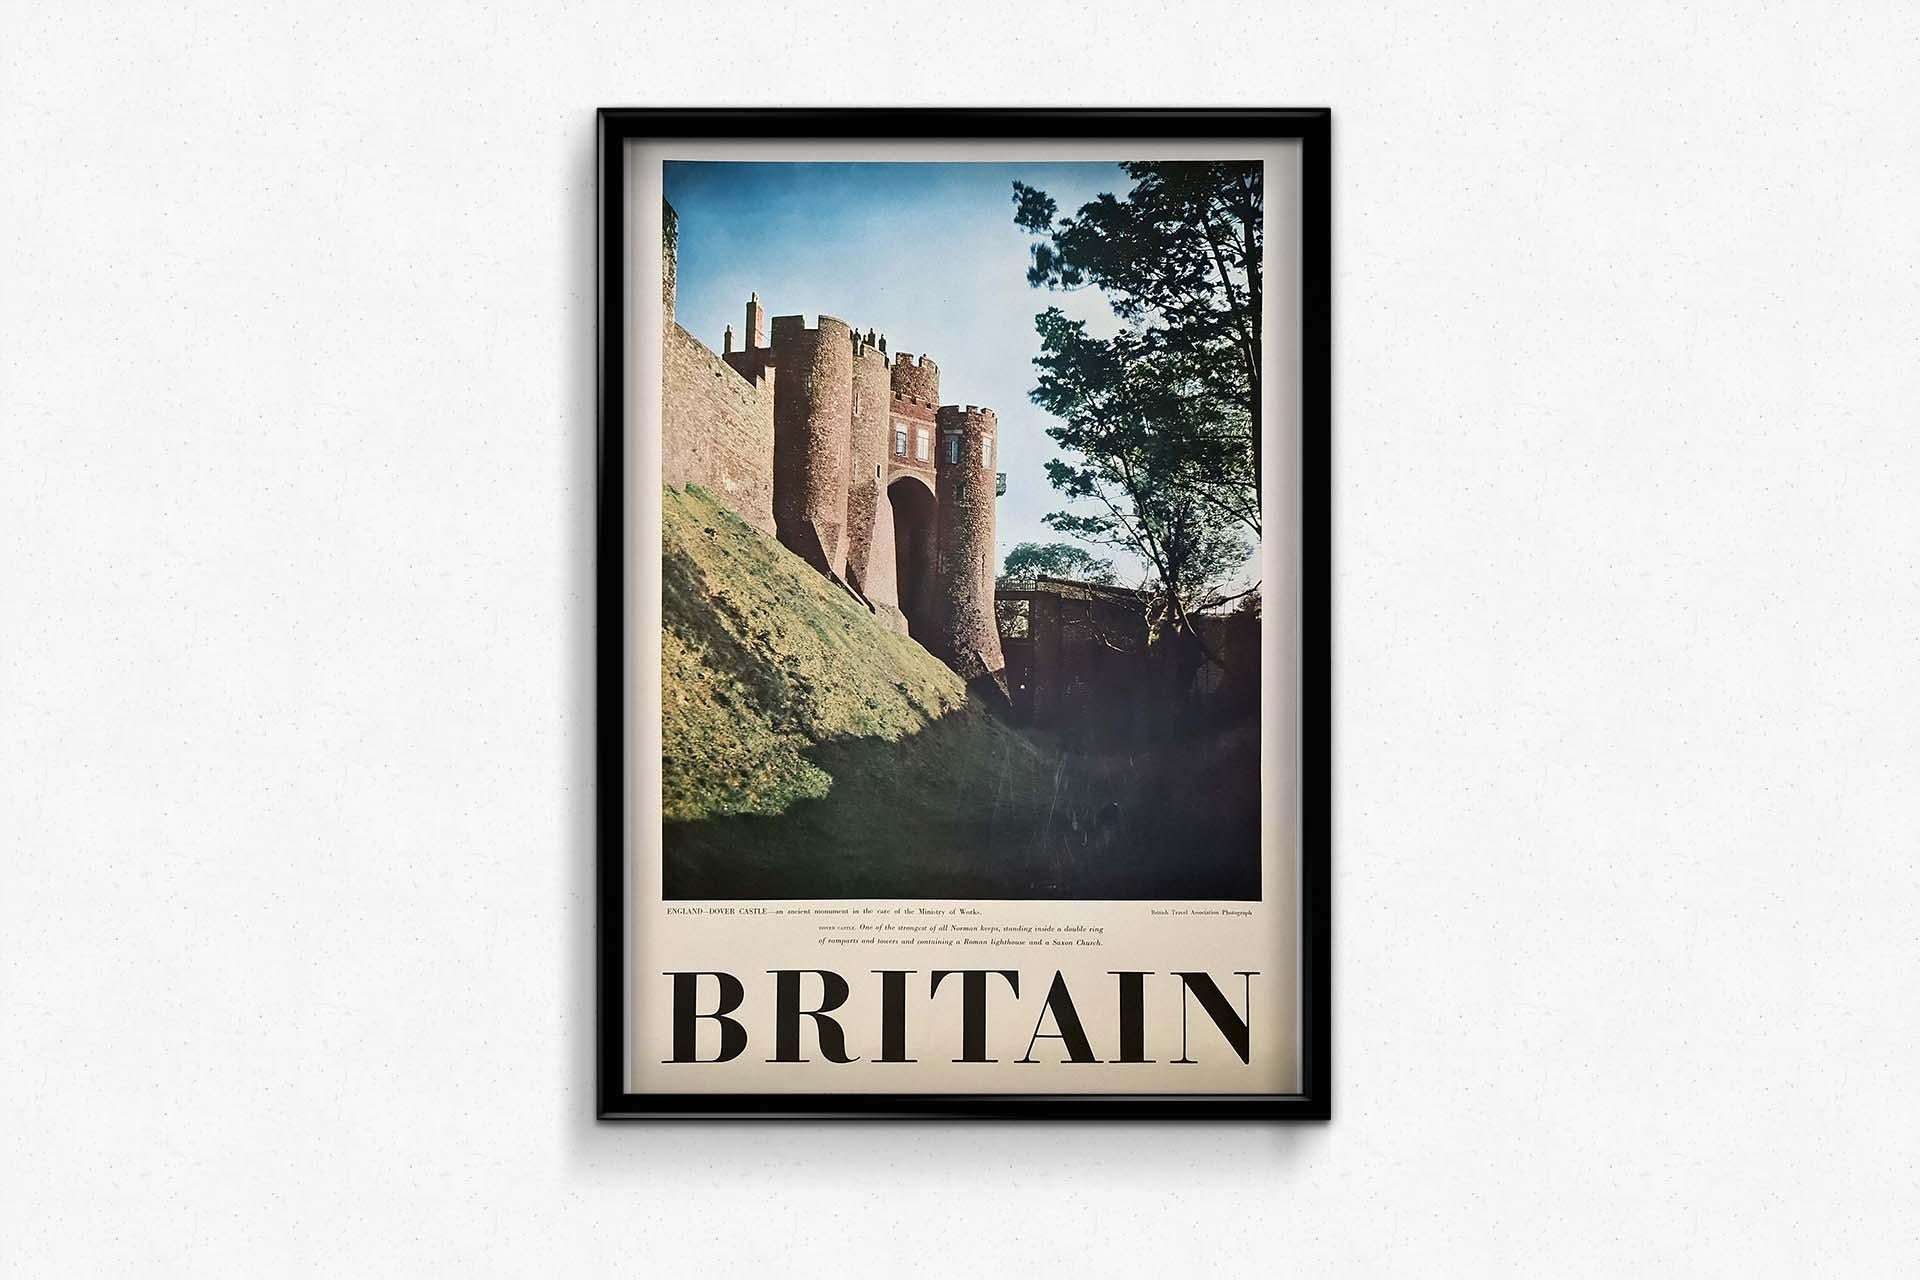 The original travel poster featuring Britain's Dover Castle serves as a captivating window into the historical grandeur of one of the most formidable Norman keeps. This vintage piece, likely hailing from the mid-20th century, invites viewers to